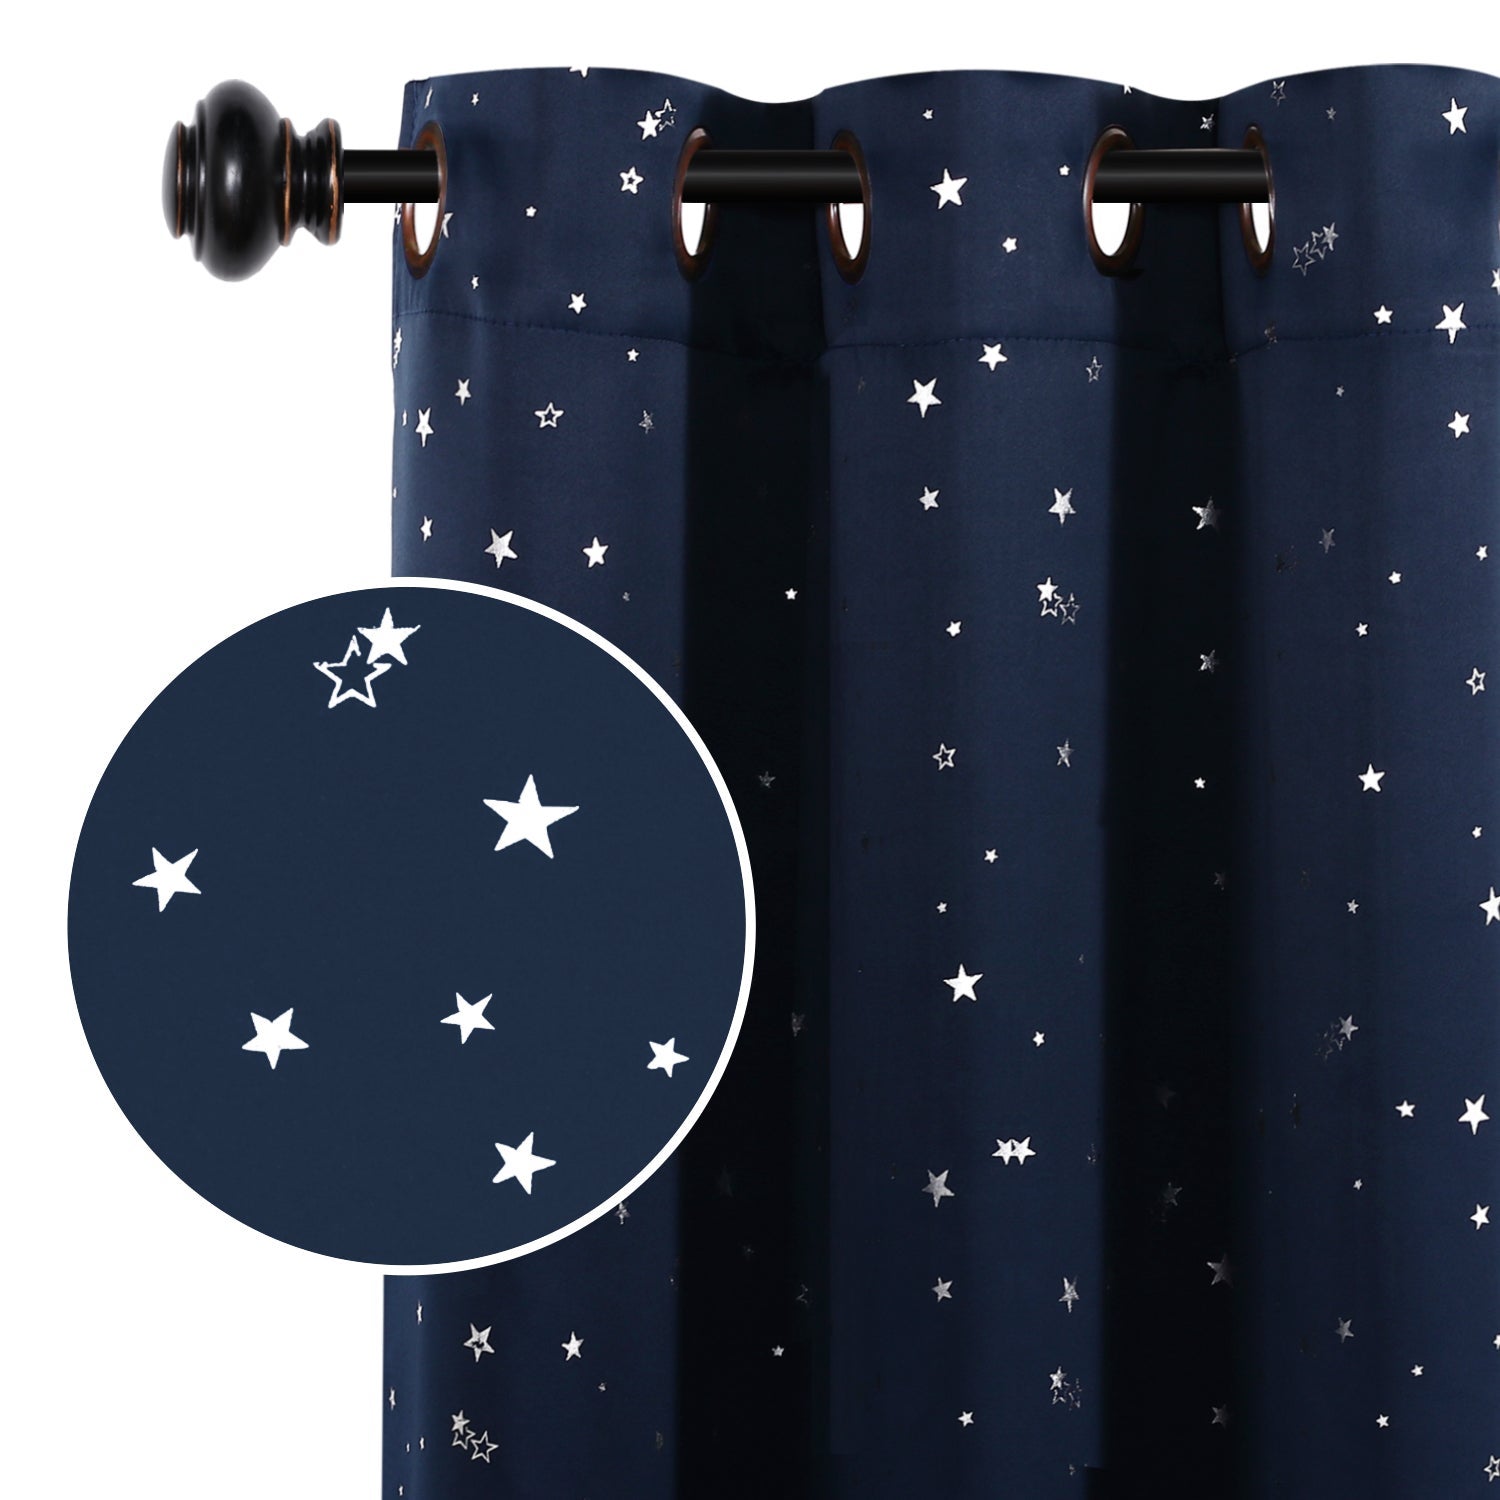 Blackout Star Curtain Kids Bedroom Blockout Curtain Thermal Curtain Sold 1 Panel